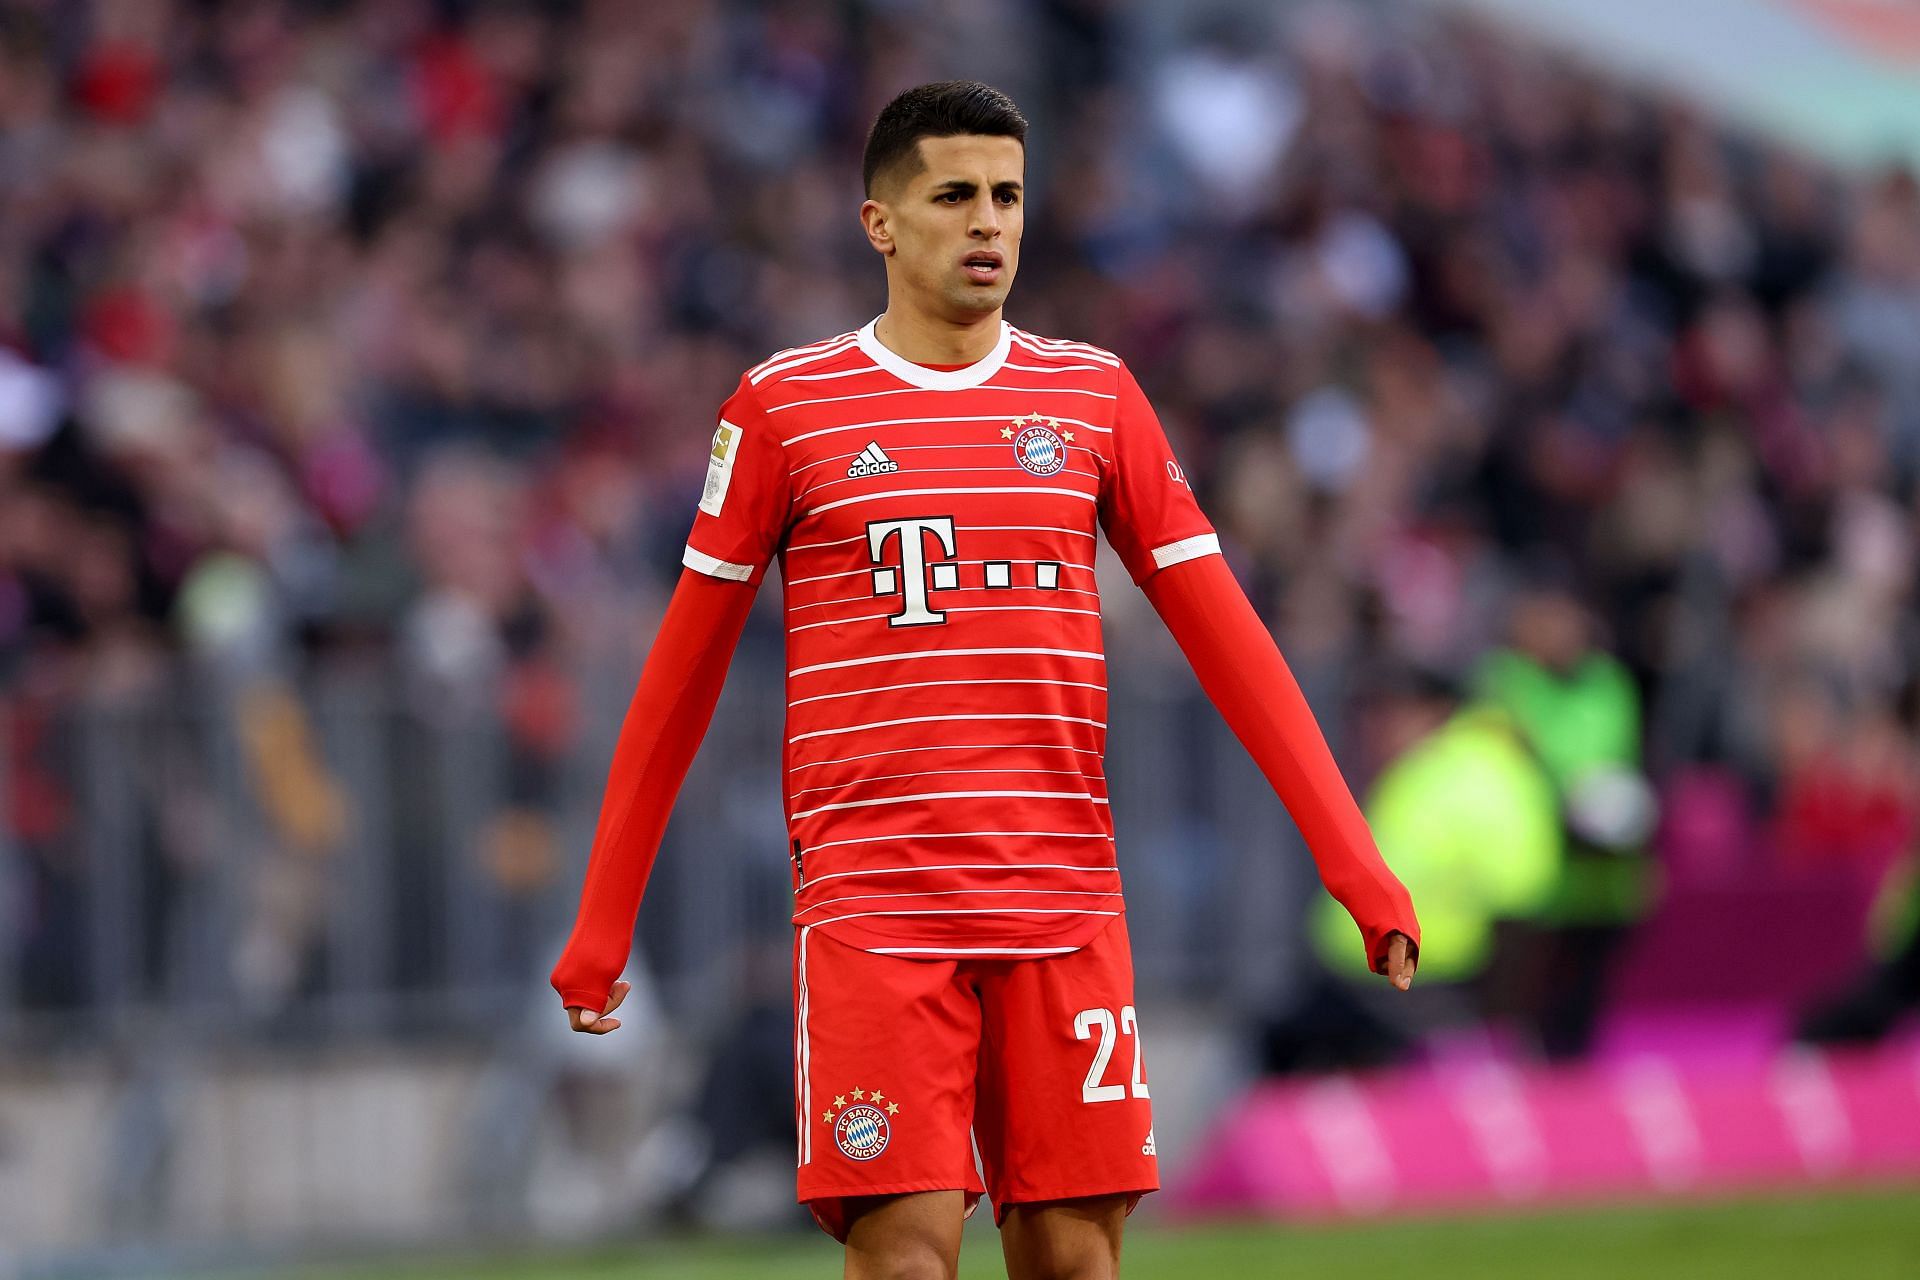 Joao Cancelo can play right-back for City but has been loaned out to Bayern Munich after a fallout with Pep Guardiola.